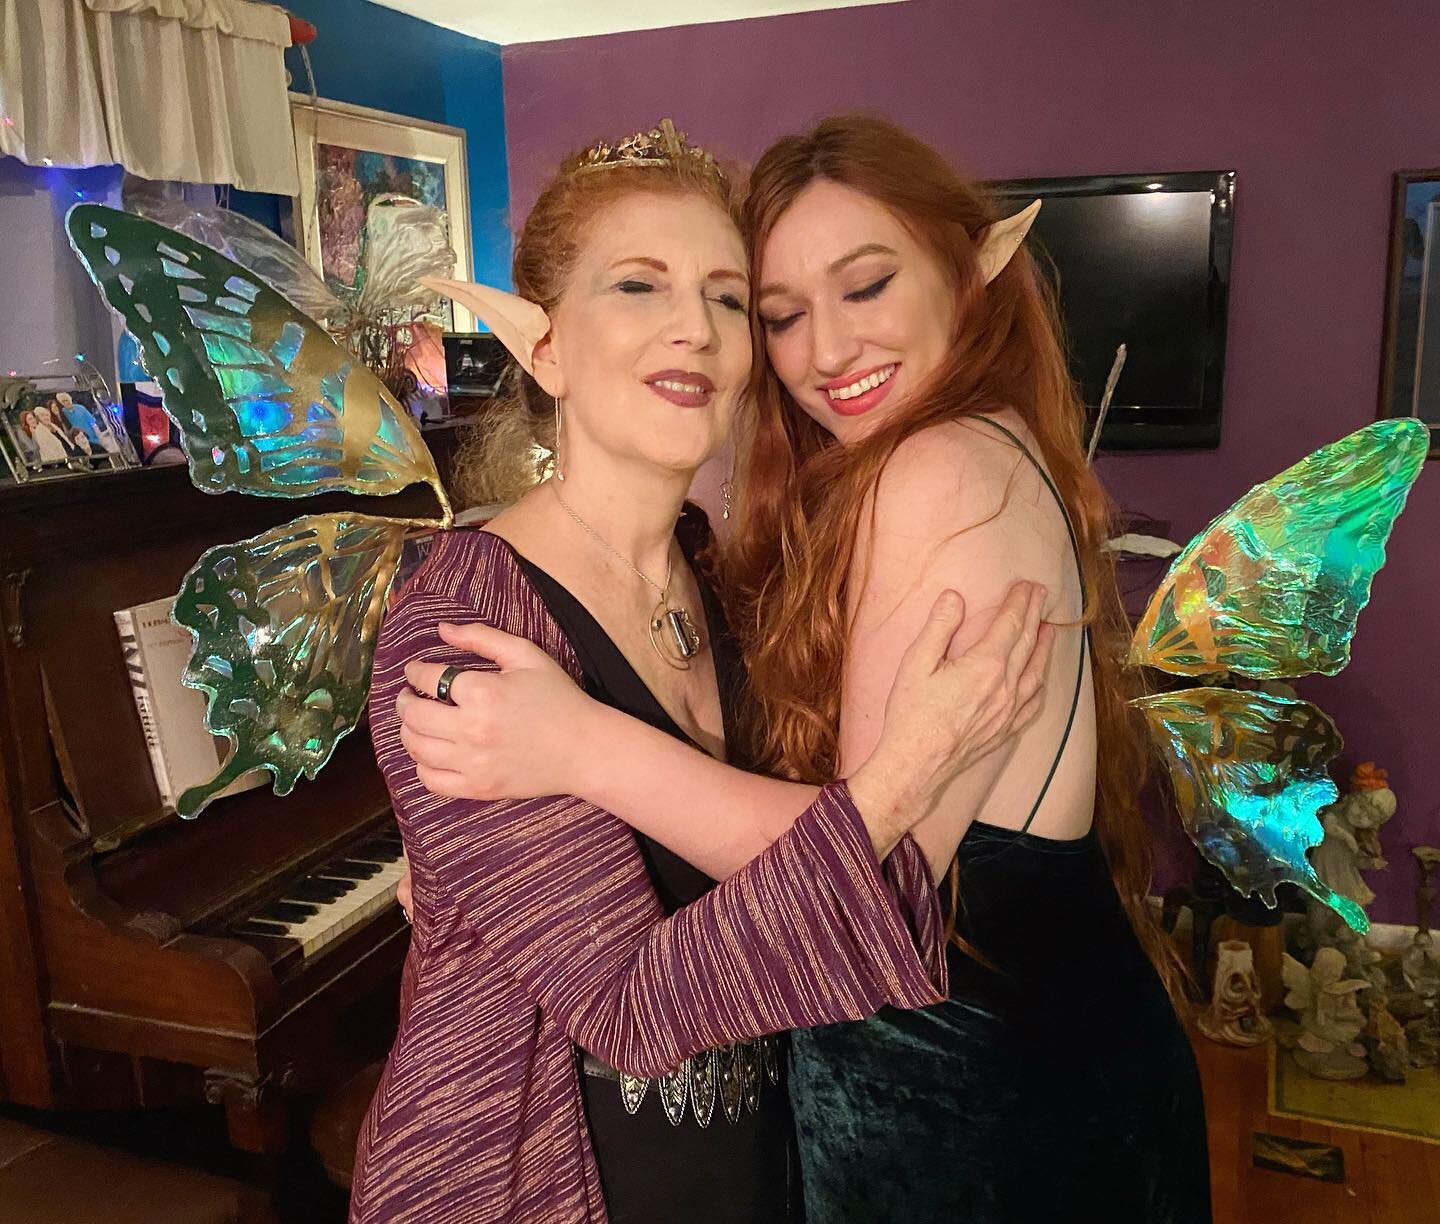 Blessed Samhain, fae friends! Had the joy of bringing in the new year with my mother, the magical being who fostered my appreciation of all things faerie. To celebrate I brought her the tiger swallowtail wings I made her and surprised her wearing my 